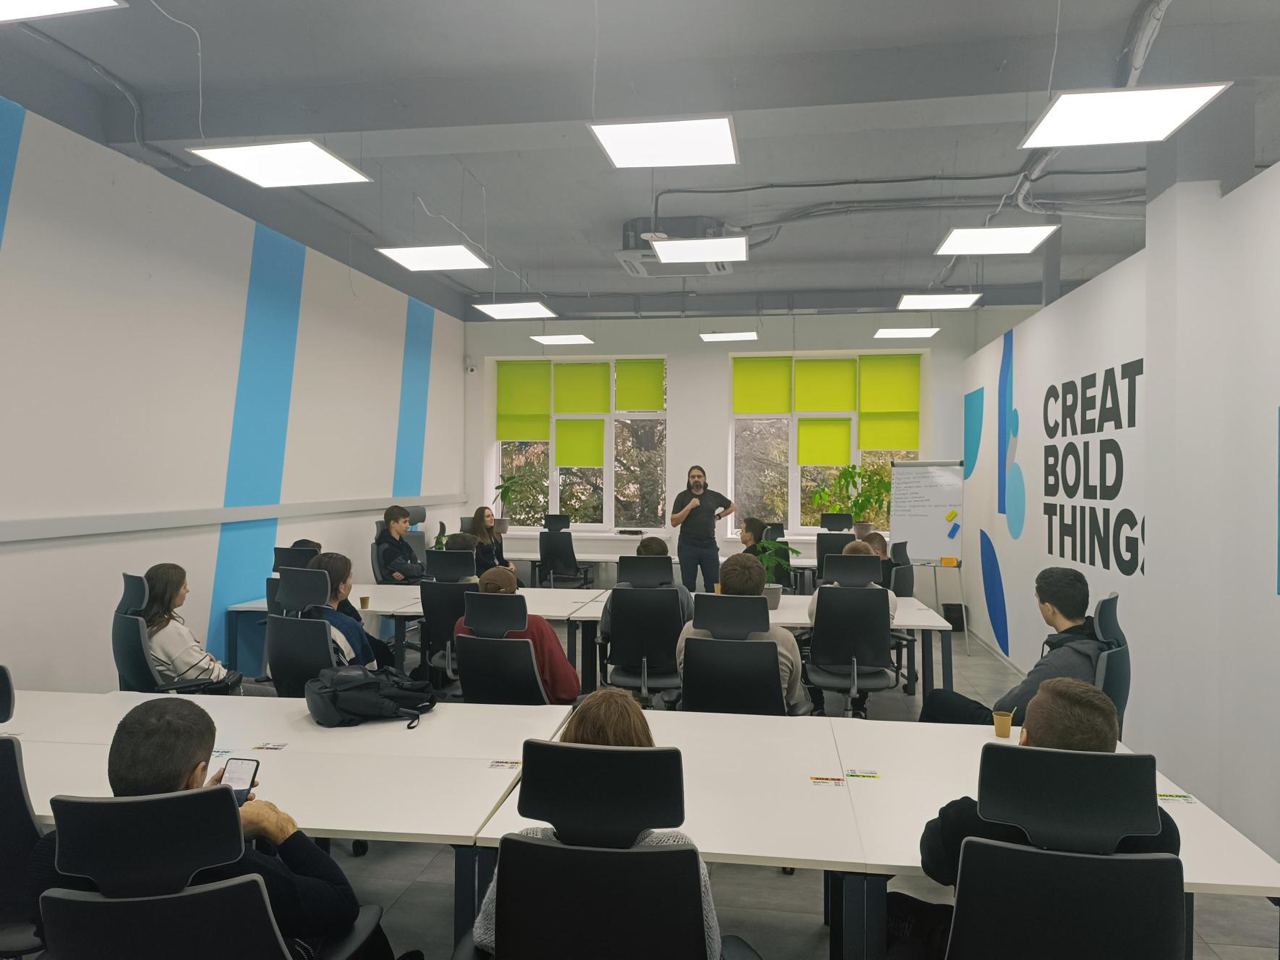 Students of the Poltava Polytechnic visit the Poltava office of SoftServe and learn about employment in an IT company